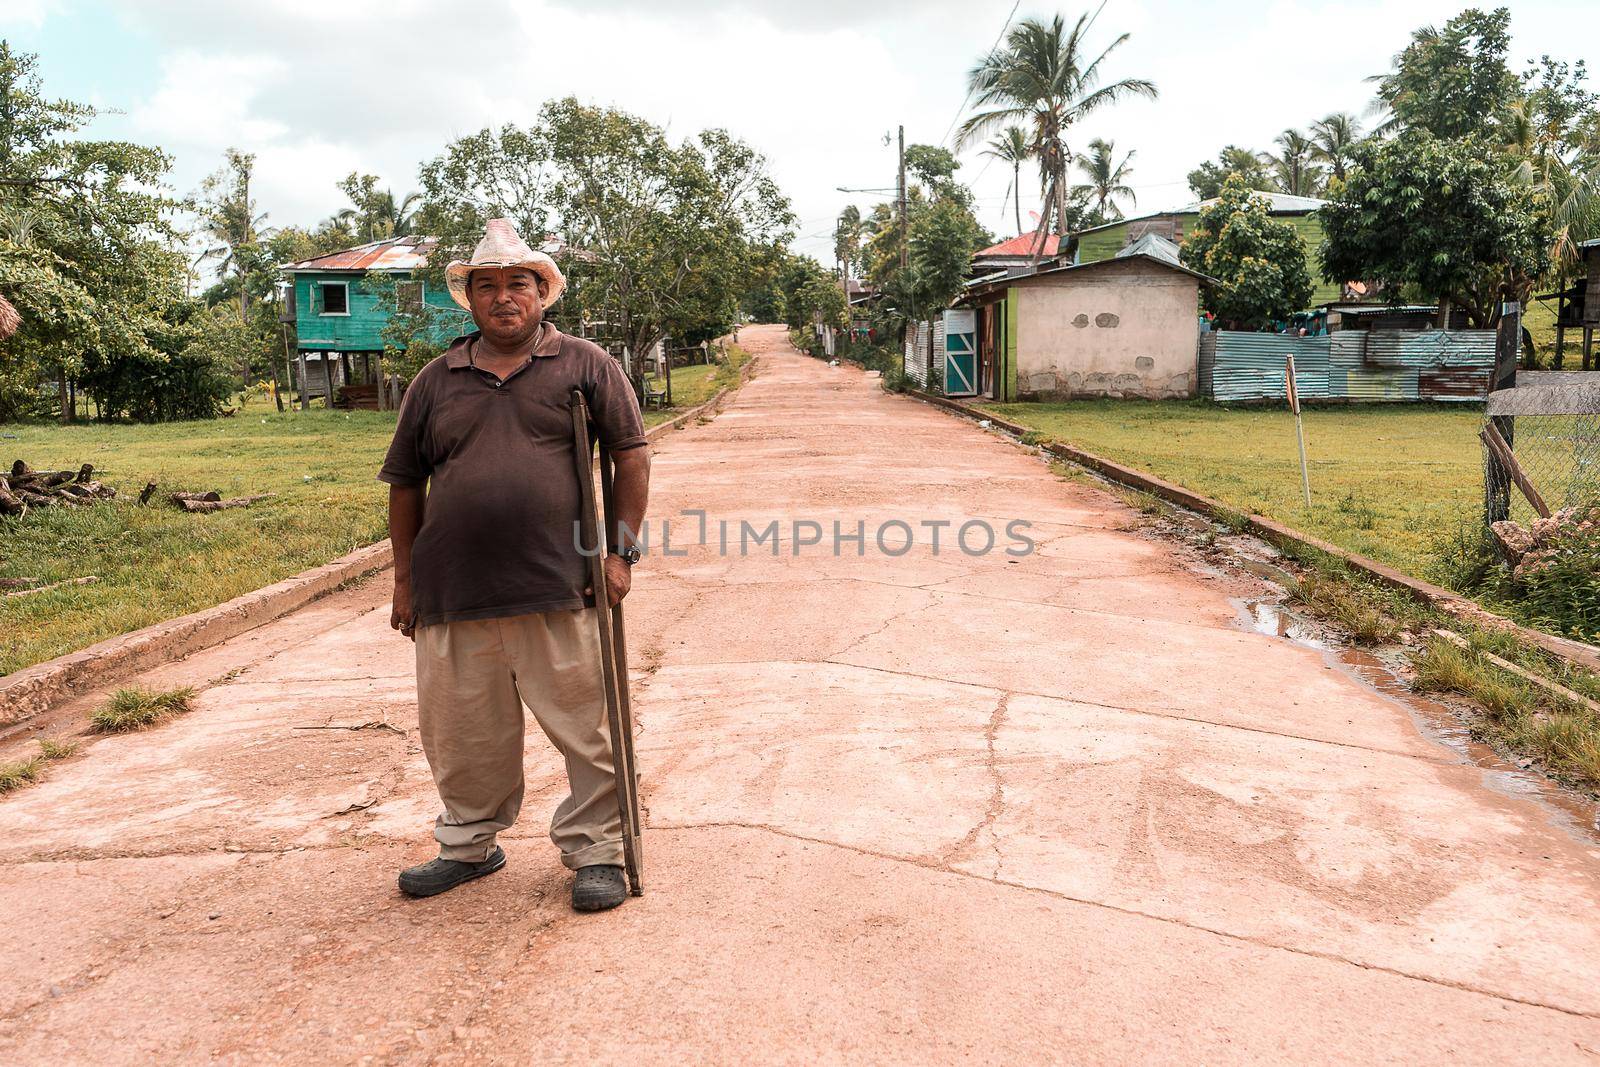 Mestizo indigenous man with crutches and hat in the caribbean of Nicaragua. Lifestyle concept of rural communities in Latin America.